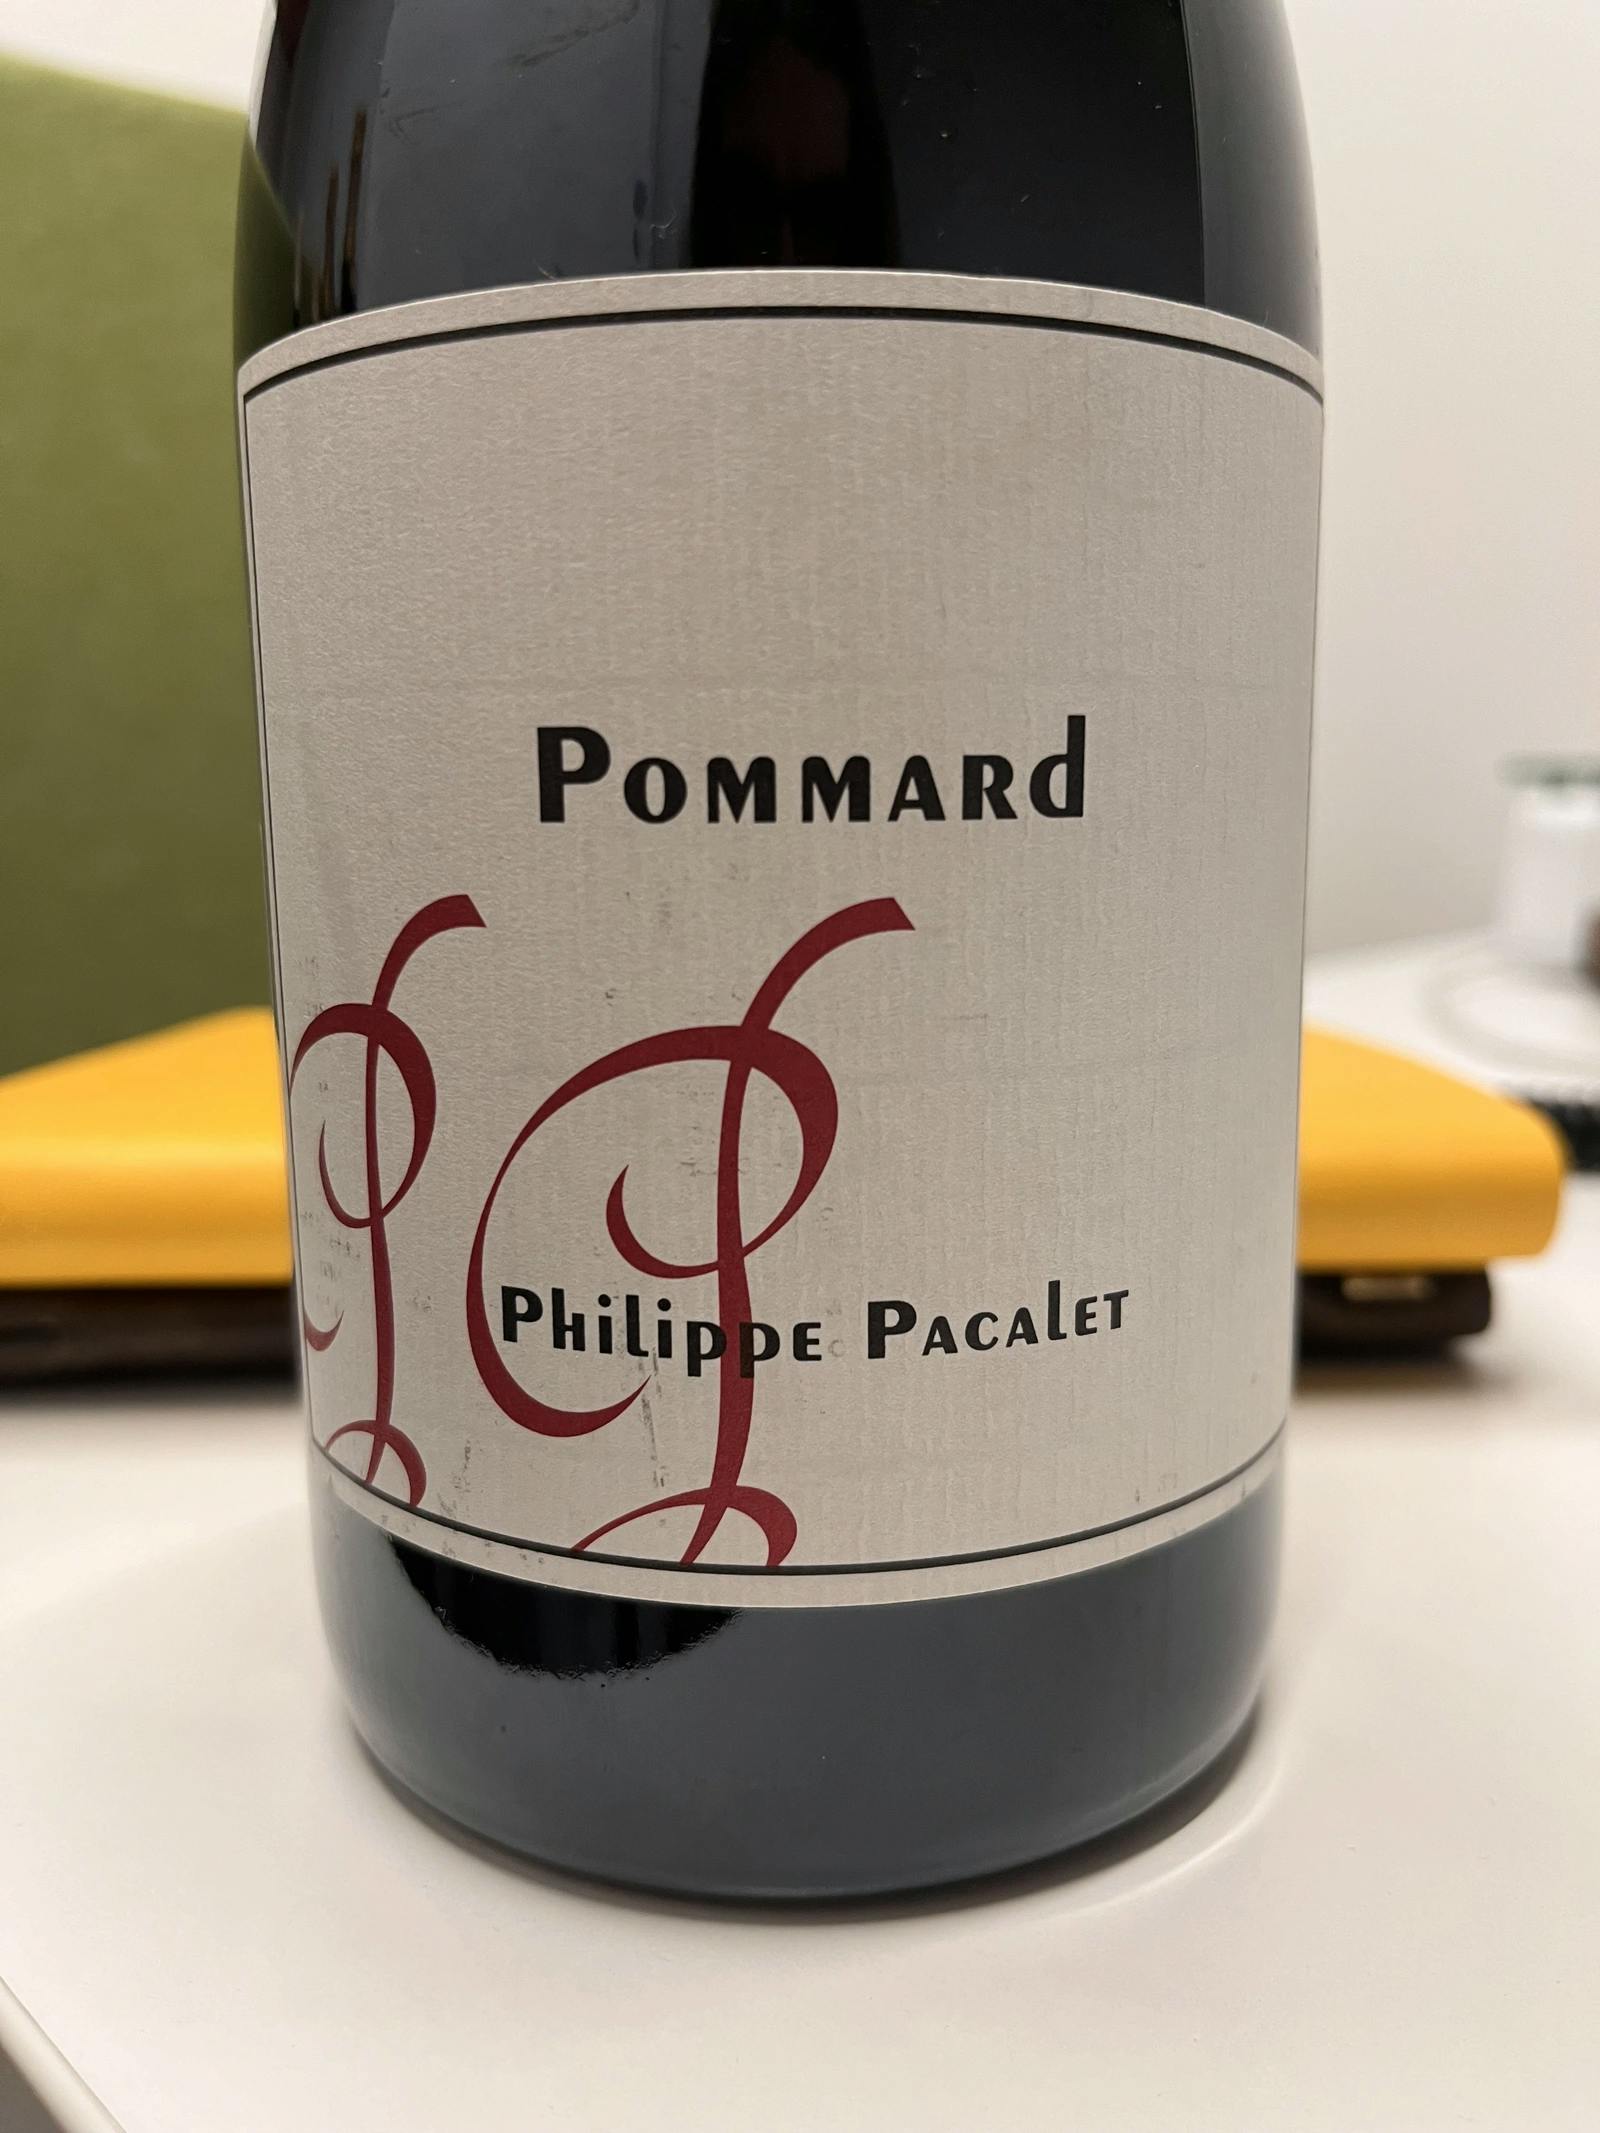 Philippe Pacalet Pommard 2017